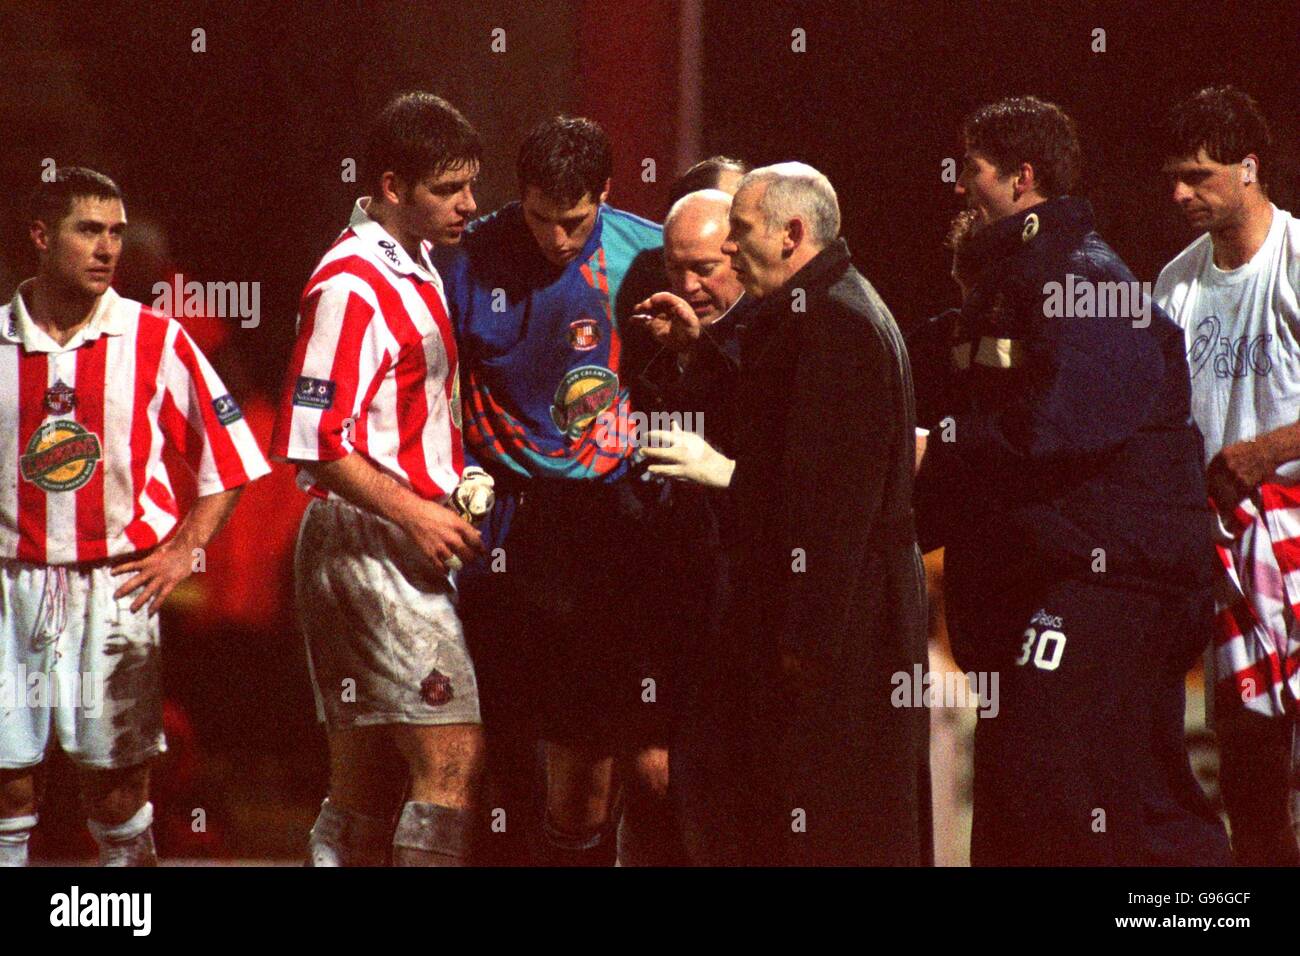 Sunderland's Niall Quinn (right) prepares to take over goalkeeping duties as Thomas Sorensen is lead off with Sunderland manager Peter Reid against Bradford City Stock Photo